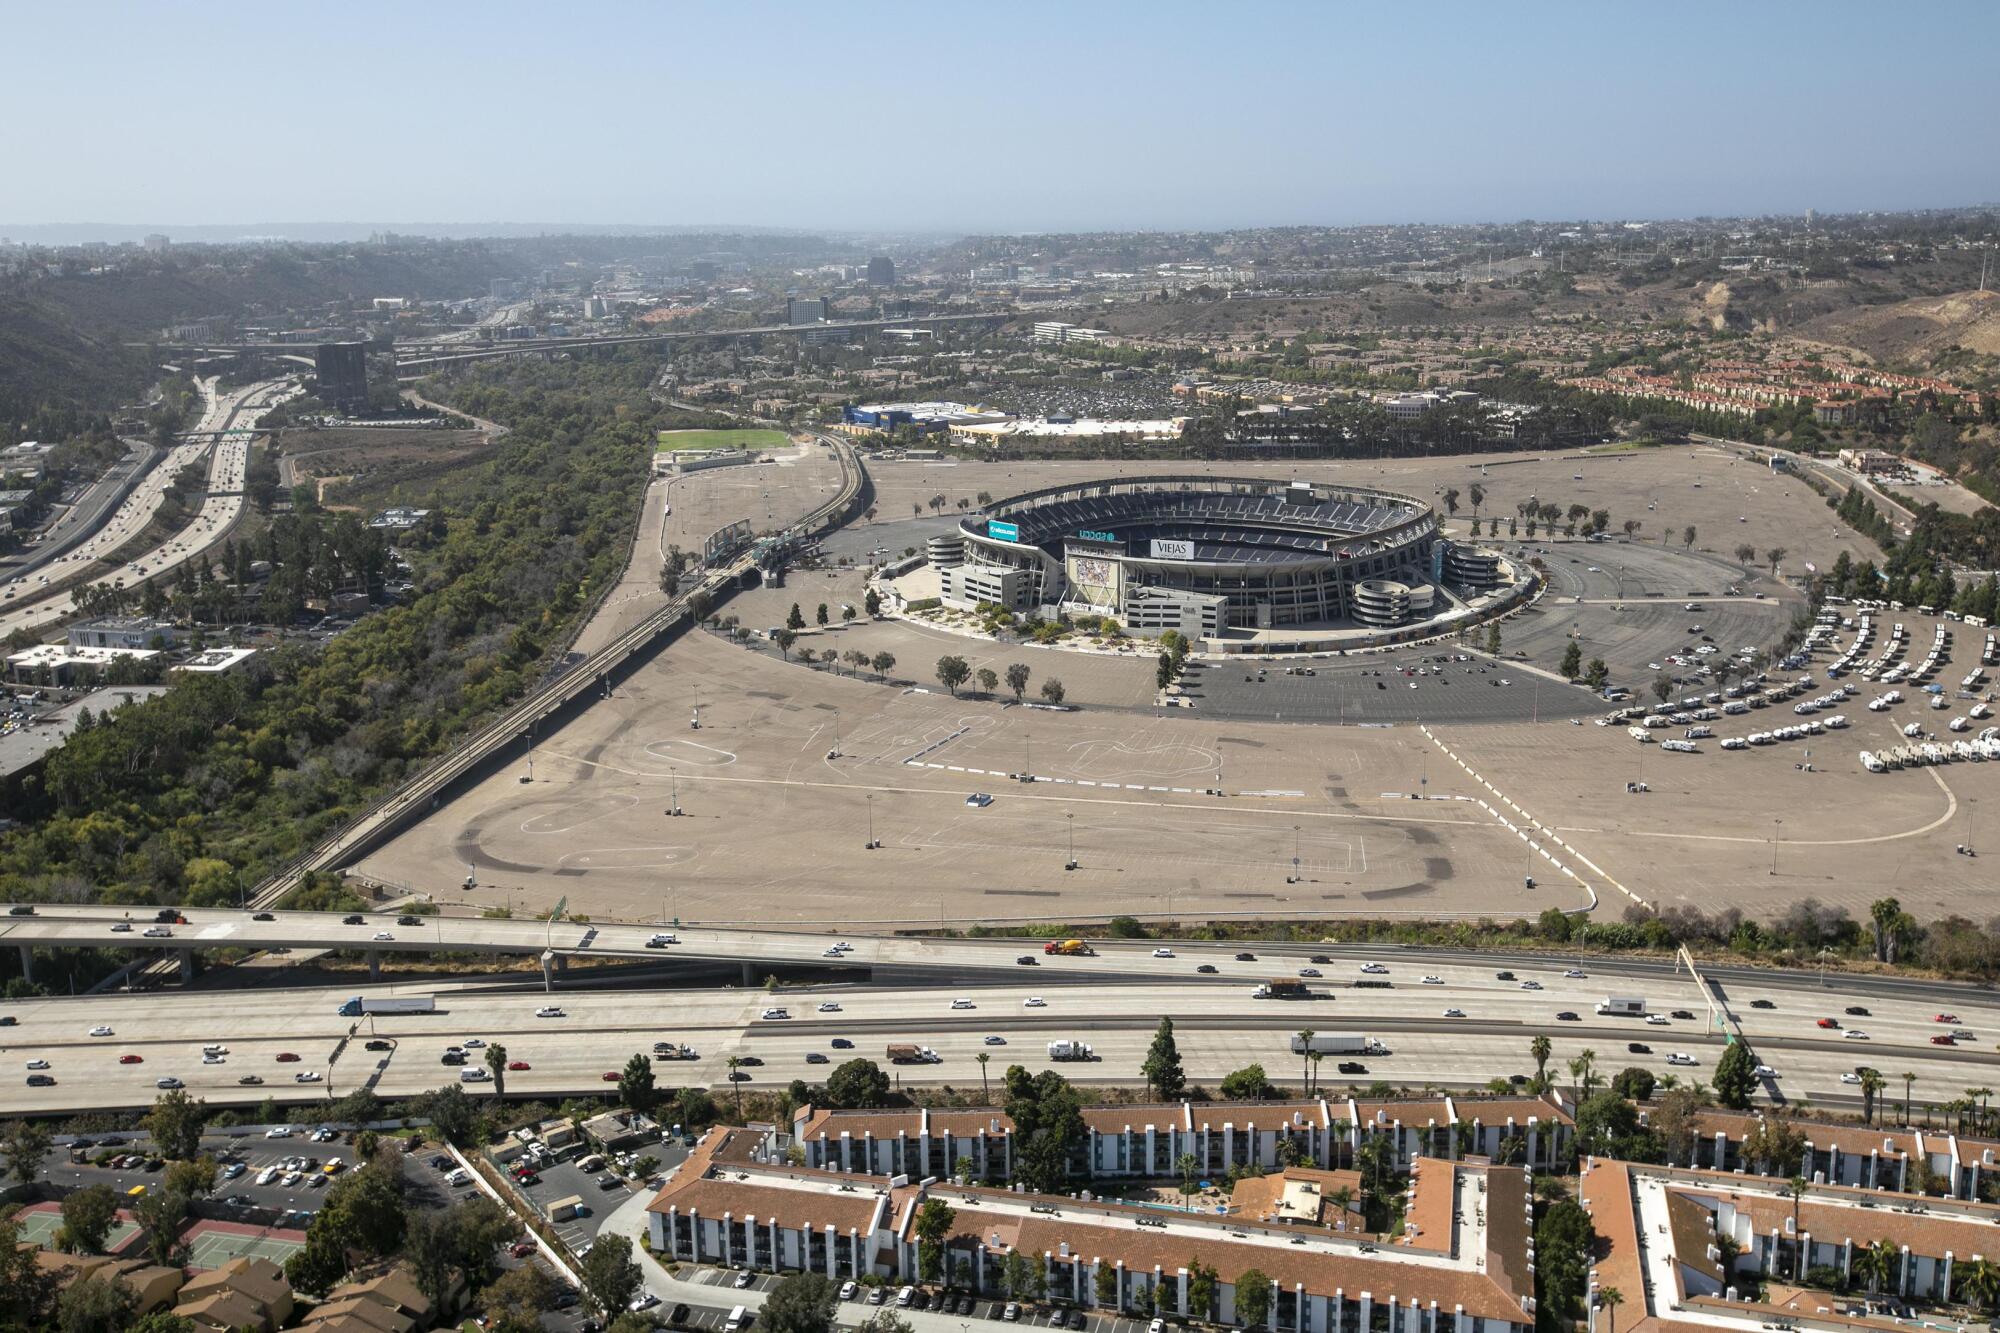 View of the stadium in Mission Valley looking down towards the west. The San Diego River is at the left, and the Murphy Canyon creek is at the edge of the parking lot by the Interstate. Photo made during a photo flight on Friday, October 18, 2019